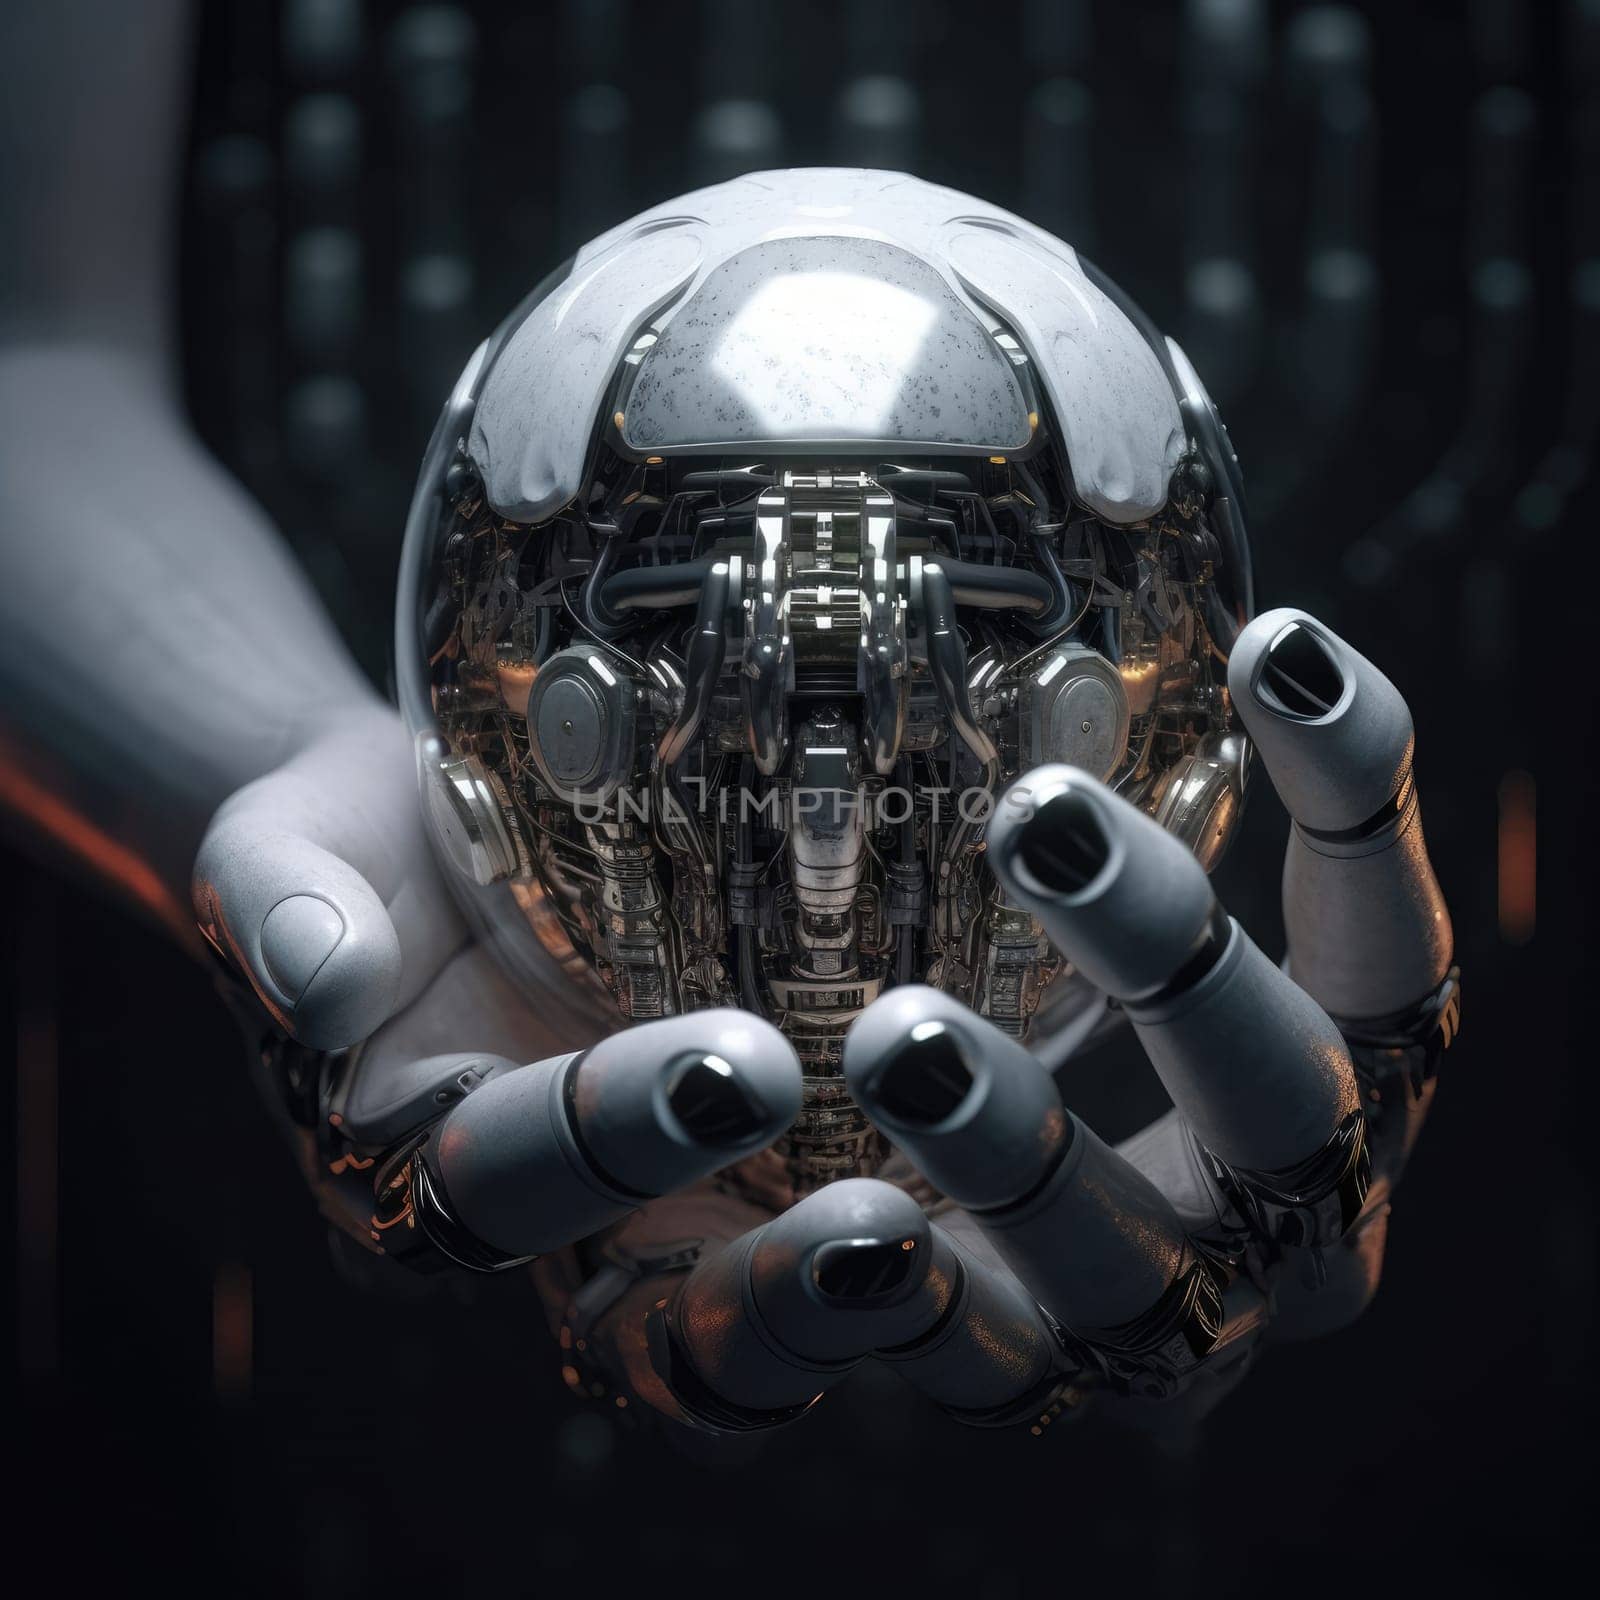 The robot's hands hold a sphere with new technologies. AI Concept